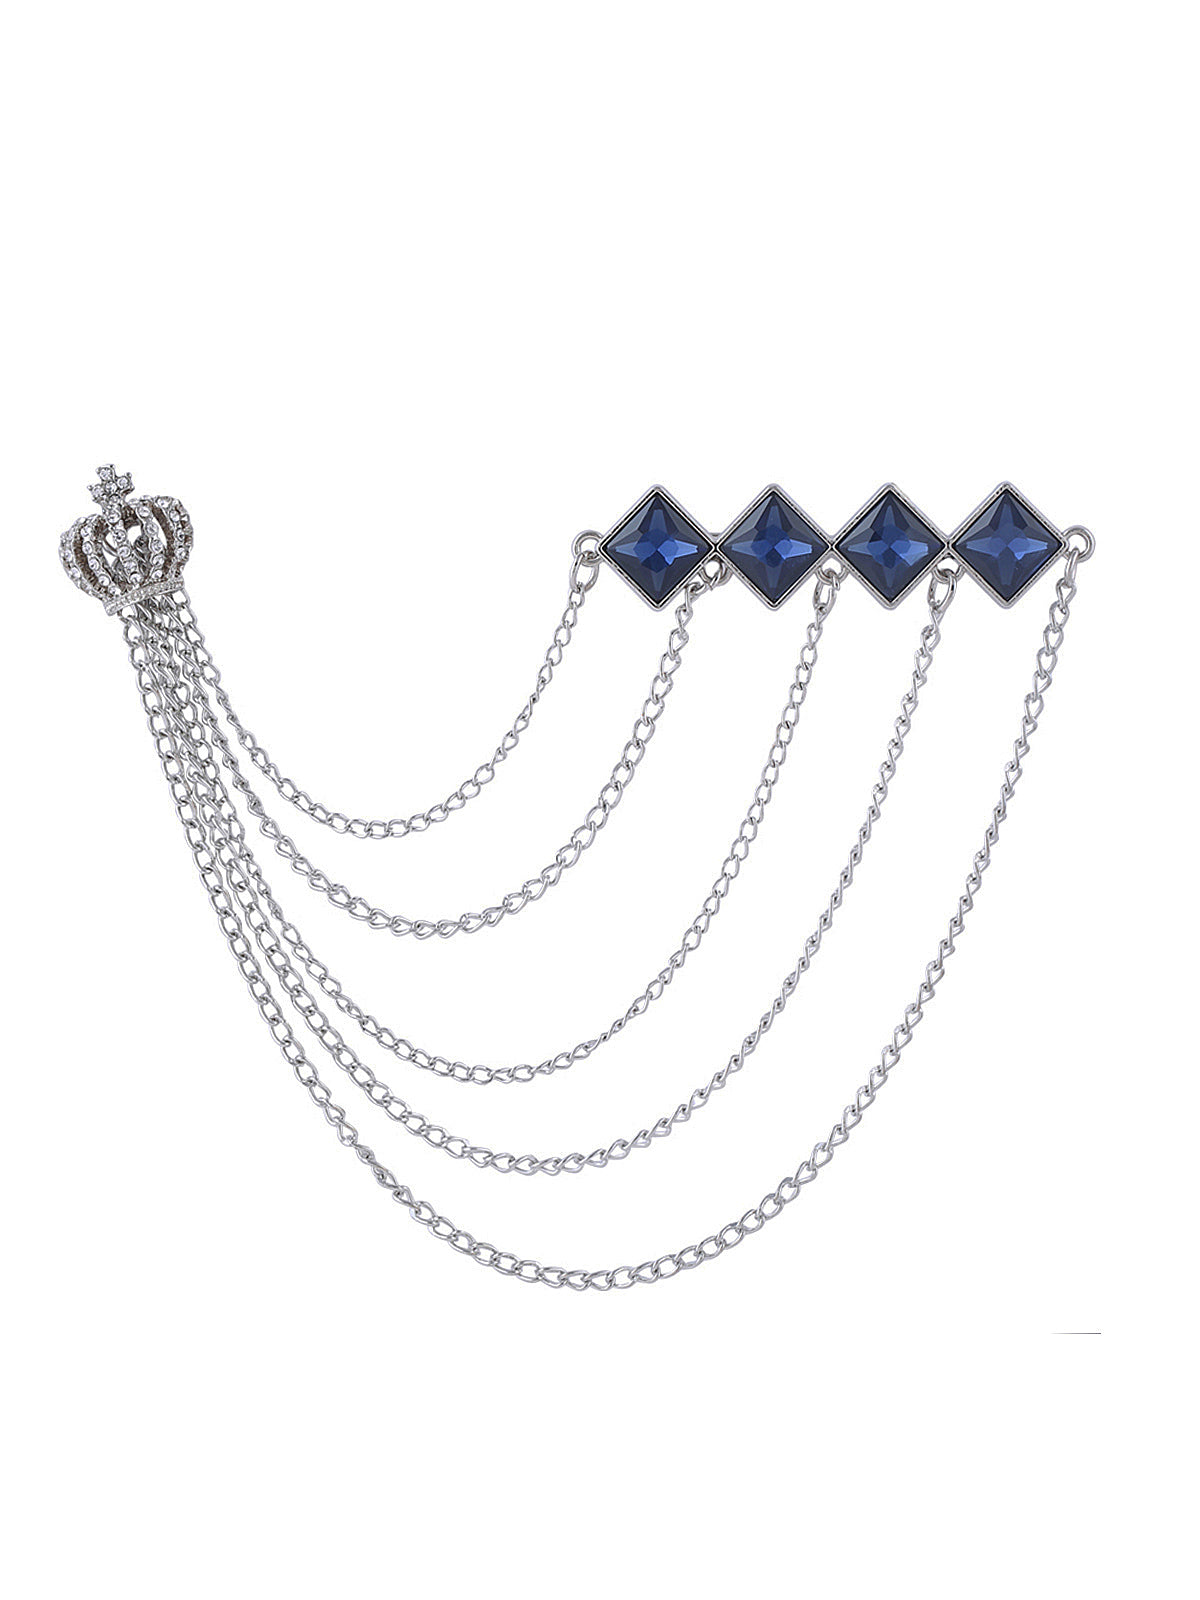 Diamond Crown & Chain Attractive Brooch Pin Silver with Blue Color